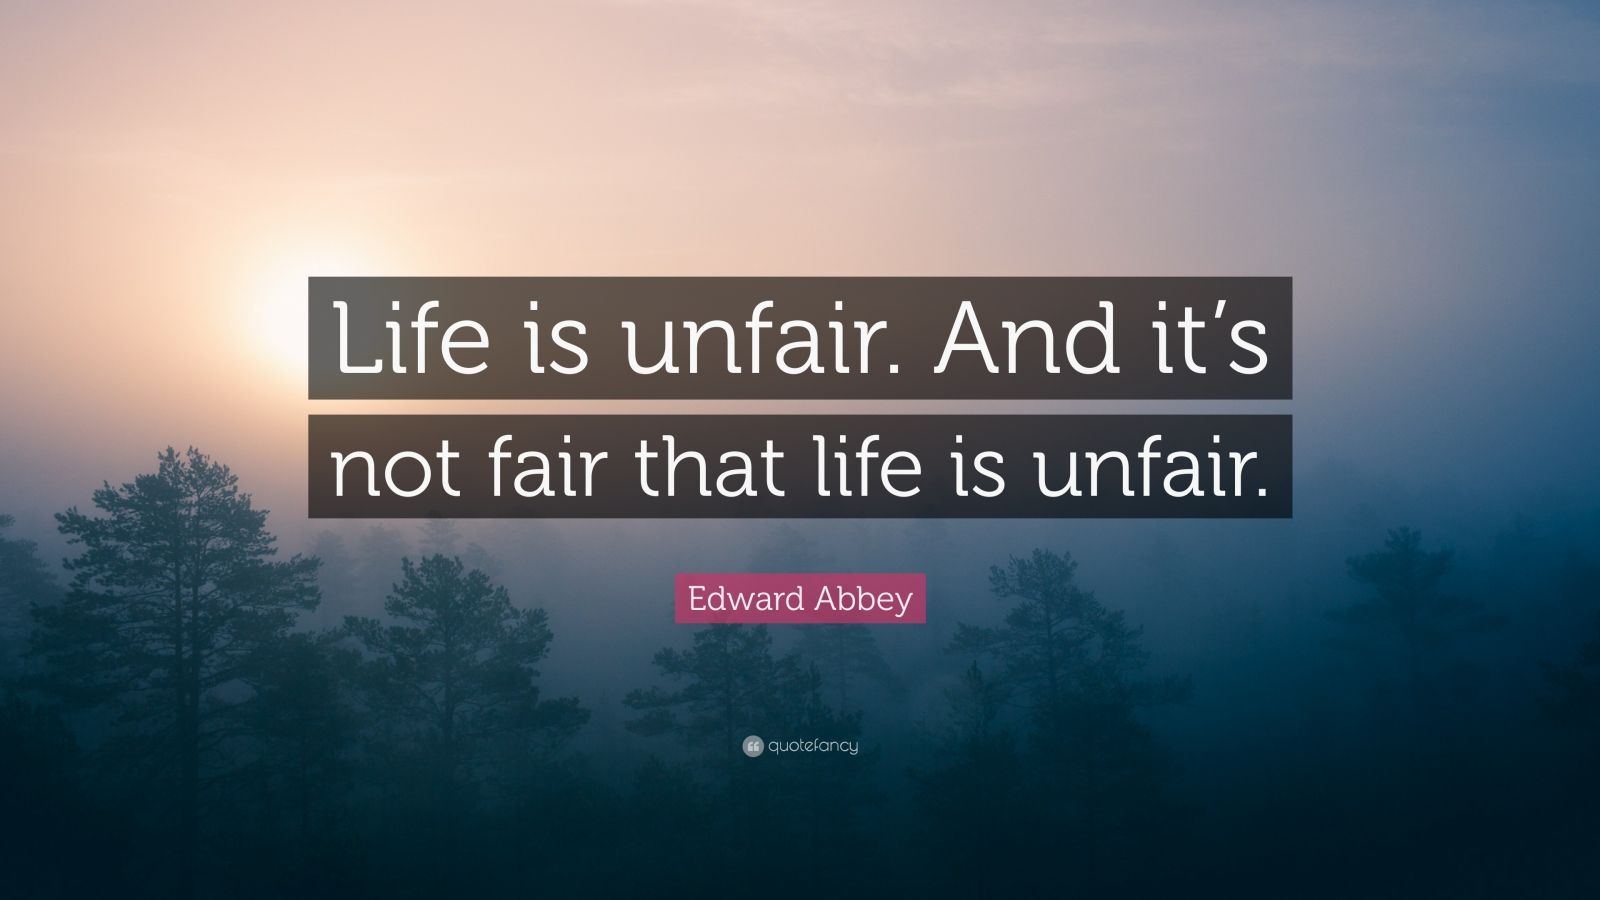 essay about unfairness of life